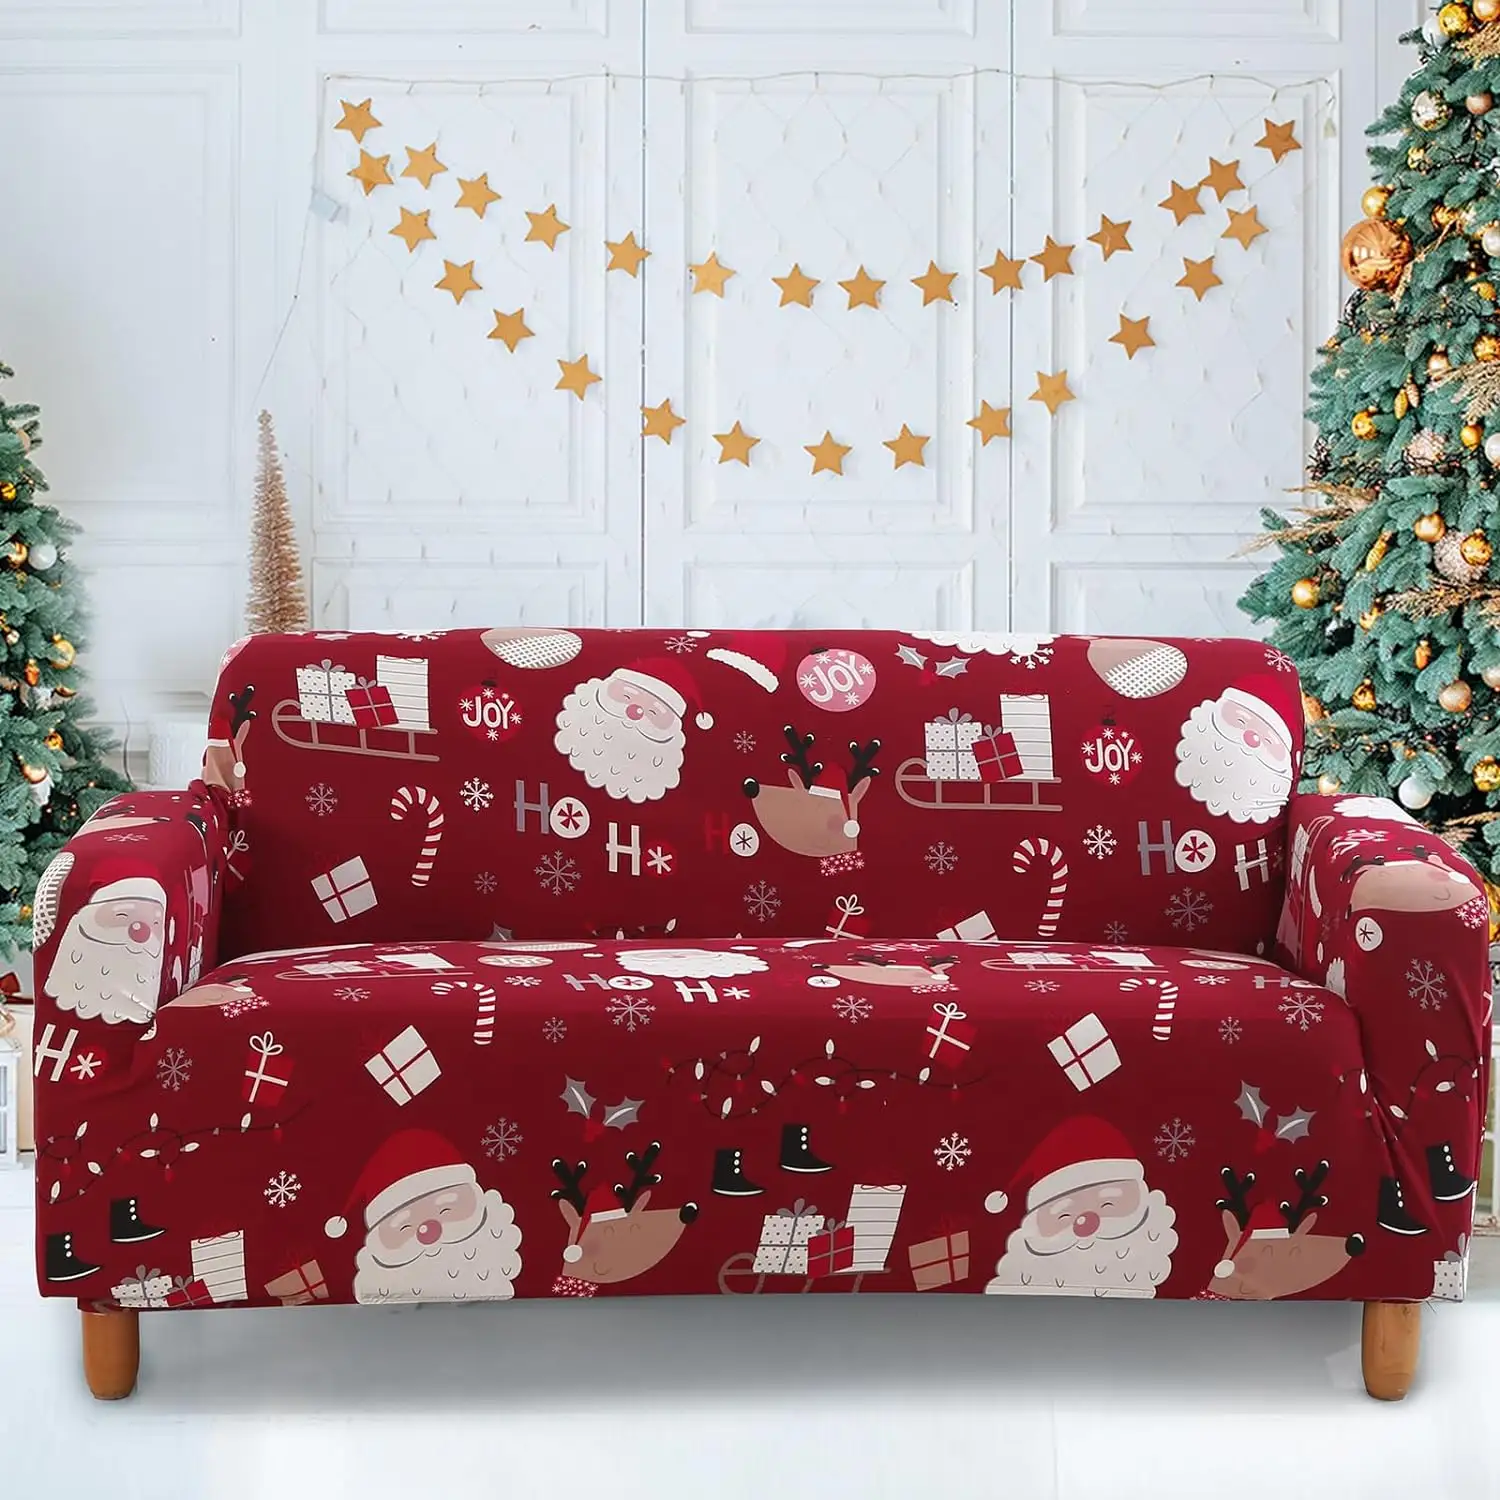 Christmas Sofa Cover Spandex Couch Cover Washable Elastic Fabric Furniture Protector for with 2 Cushion Covers,Snowmen